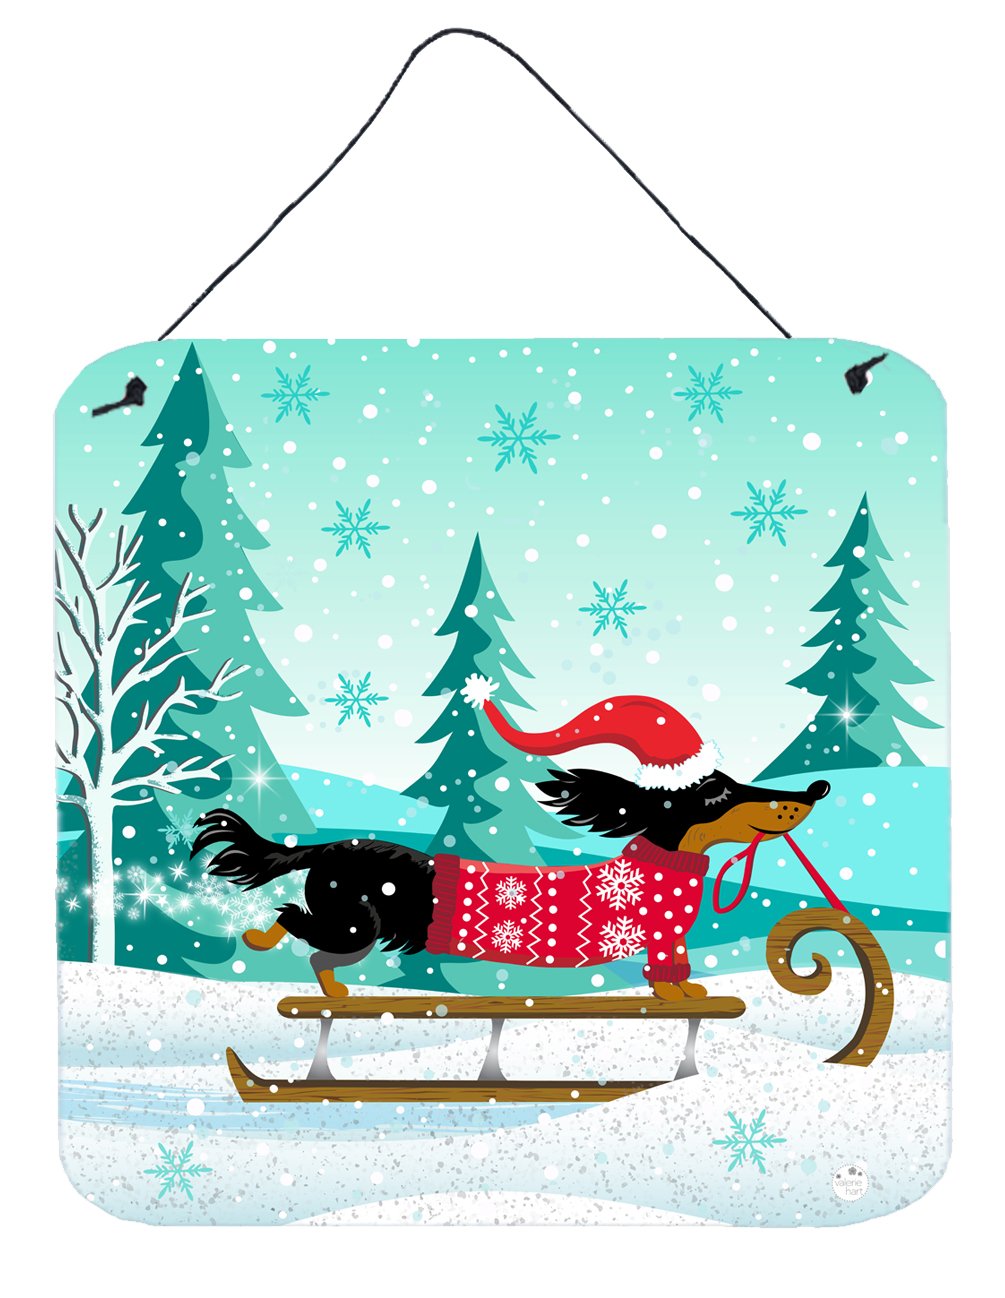 Merry Christmas Dachshund Wall or Door Hanging Prints VHA3030DS66 by Caroline's Treasures